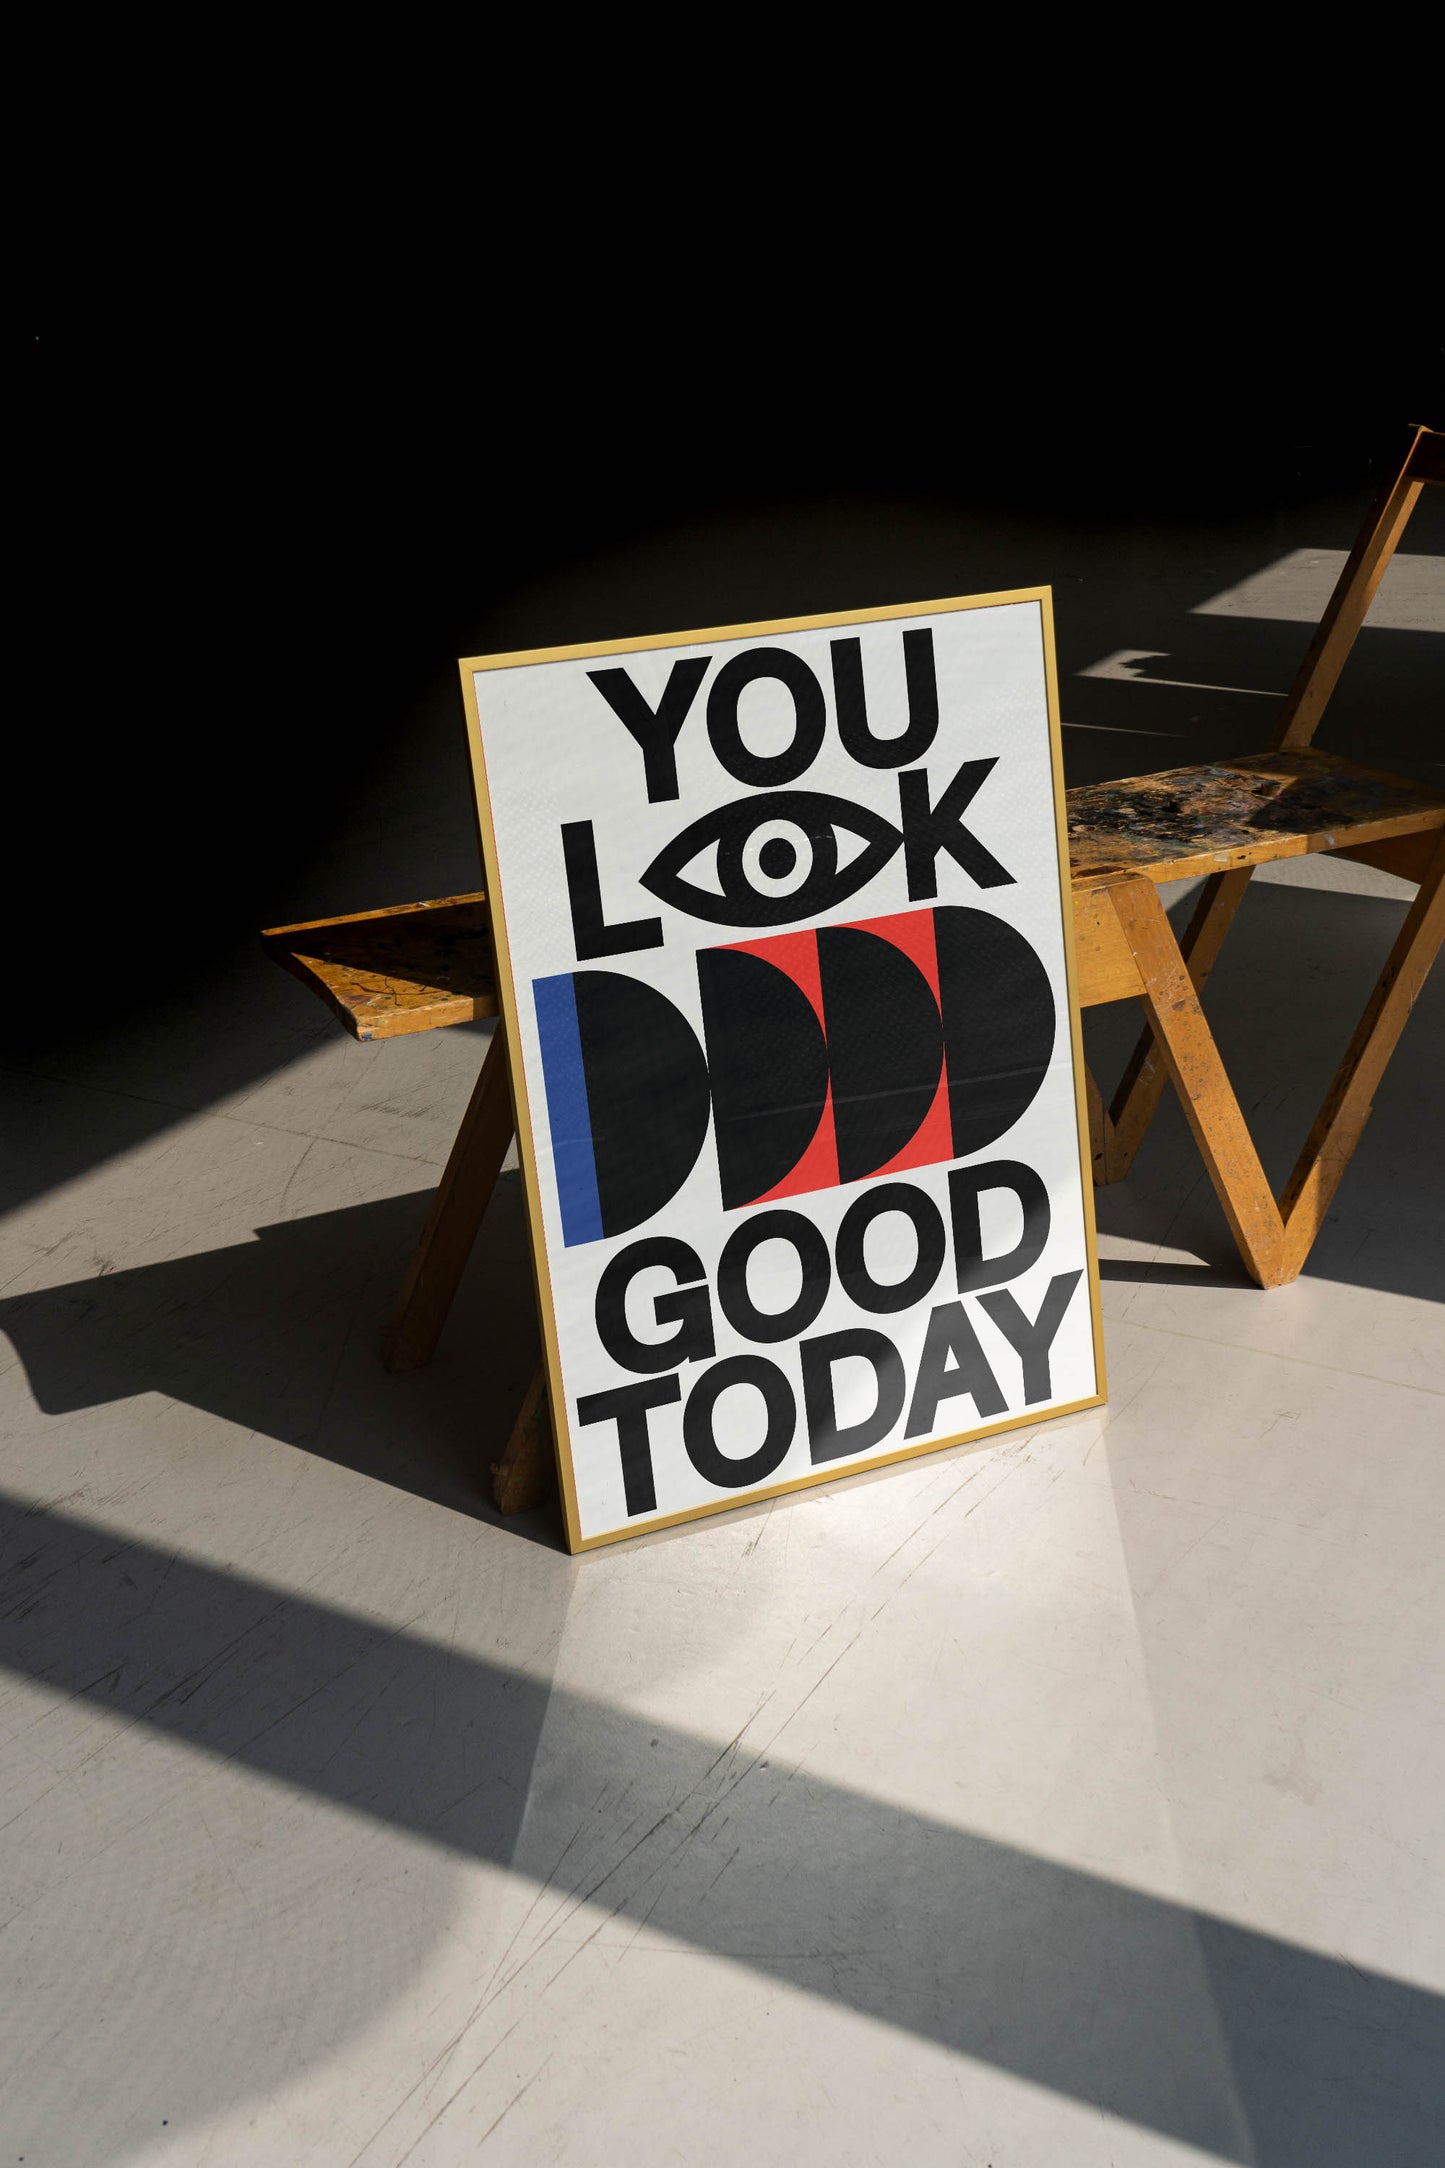 YOU LOOK GOOD TODAY